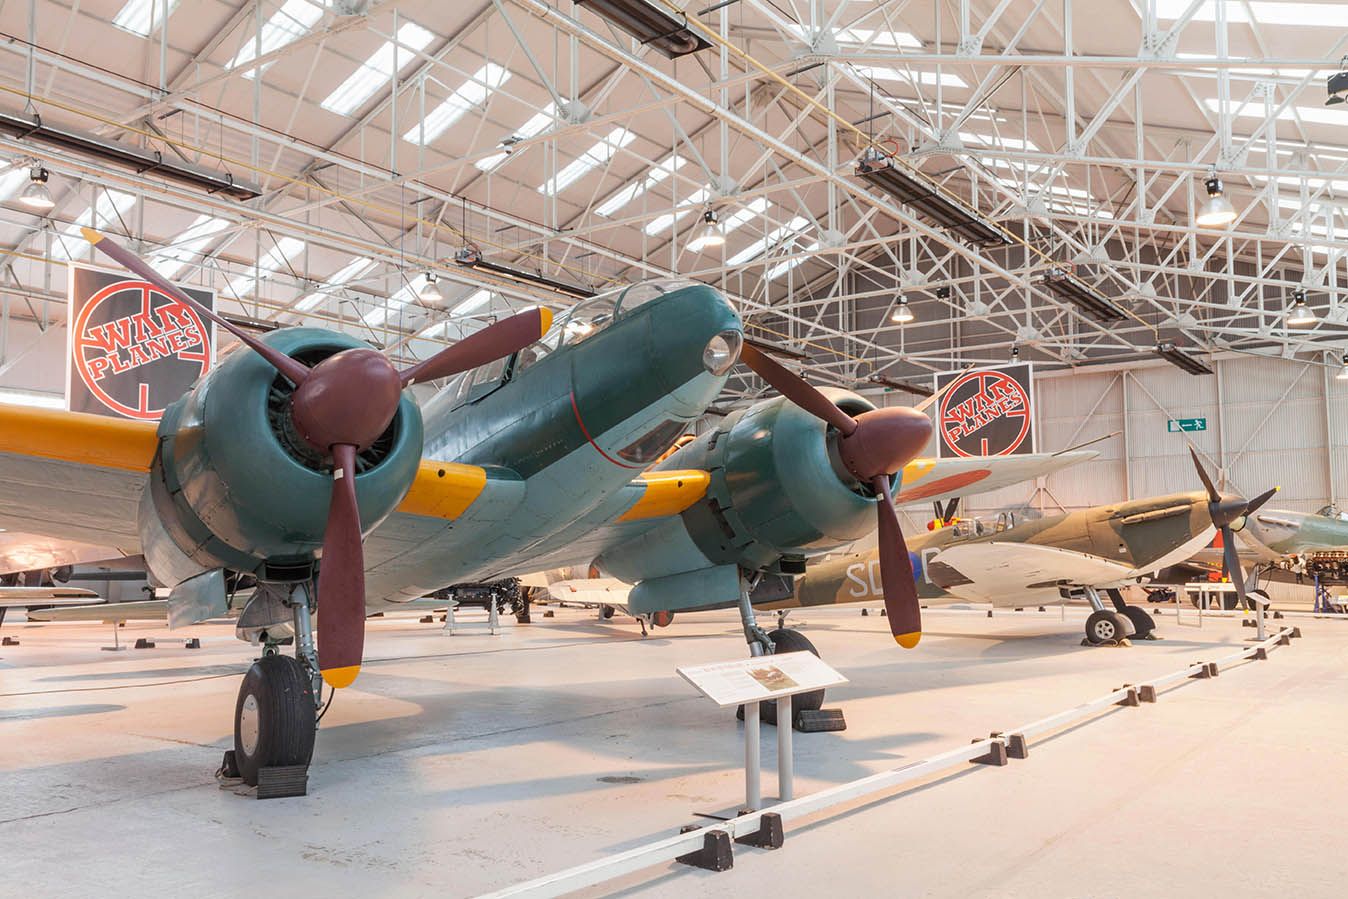 Aircraft at Cosford Museum